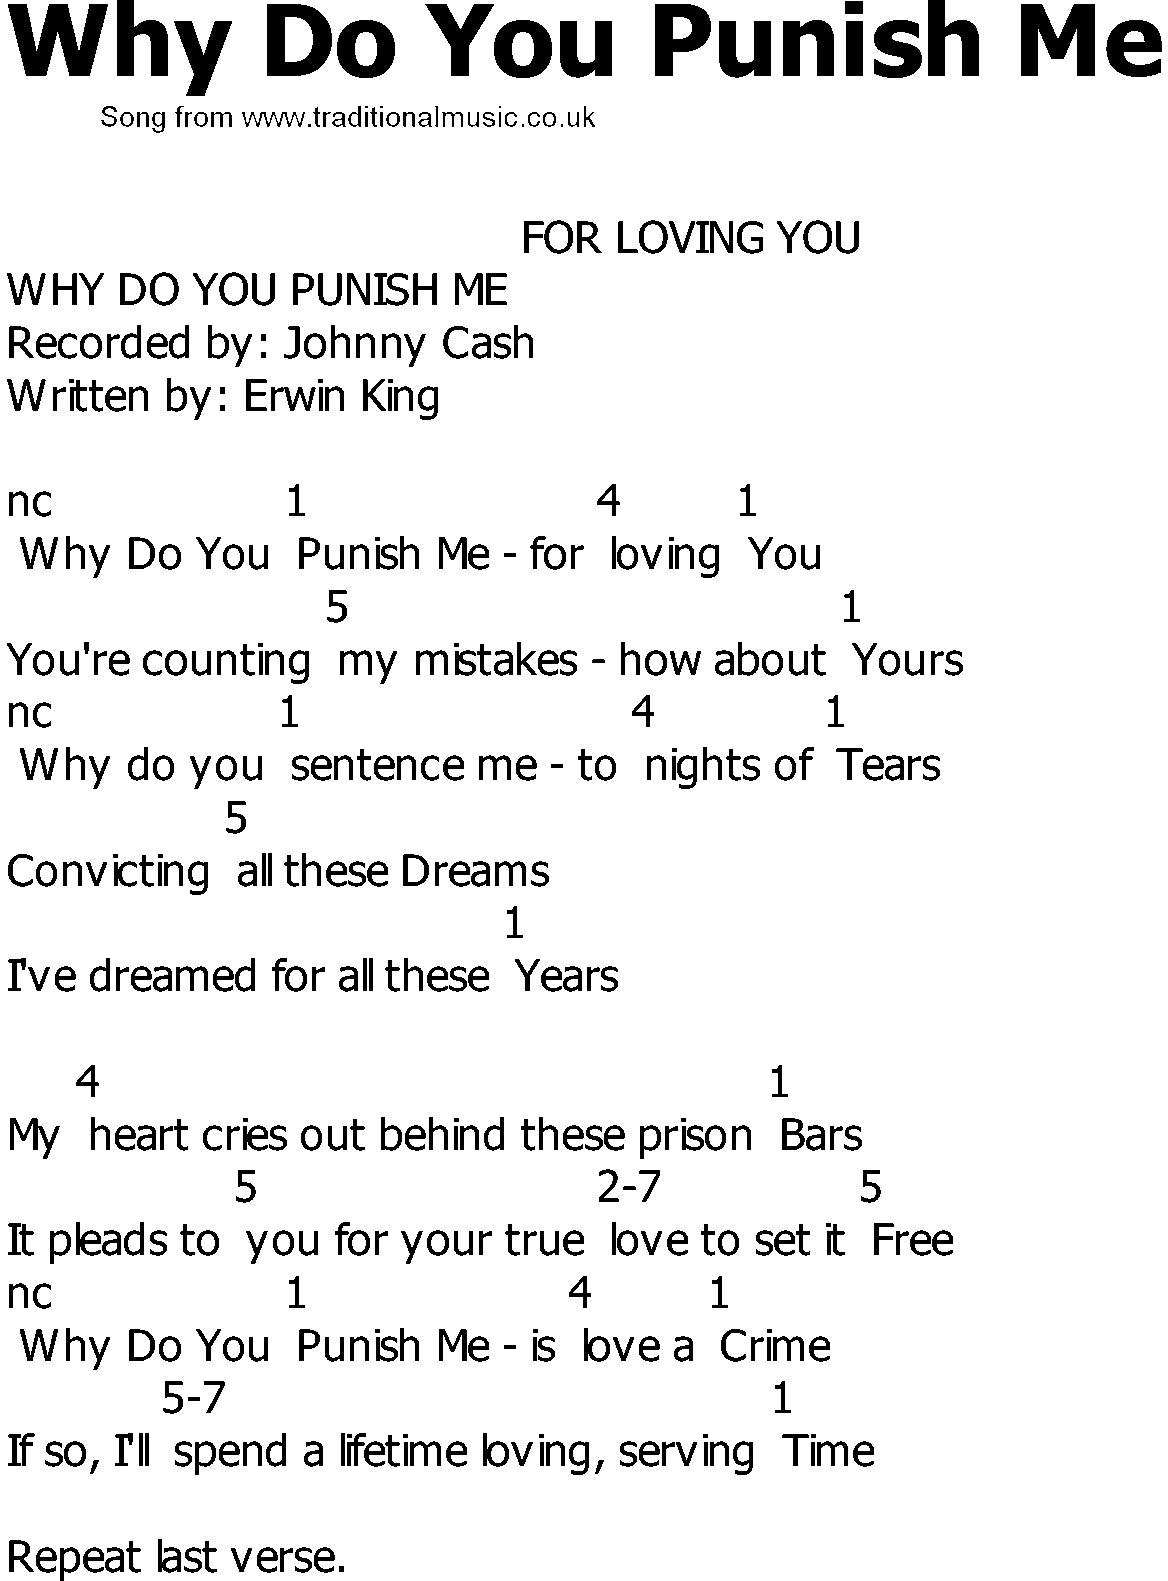 Old Country song lyrics with chords - Why Do You Punish Me